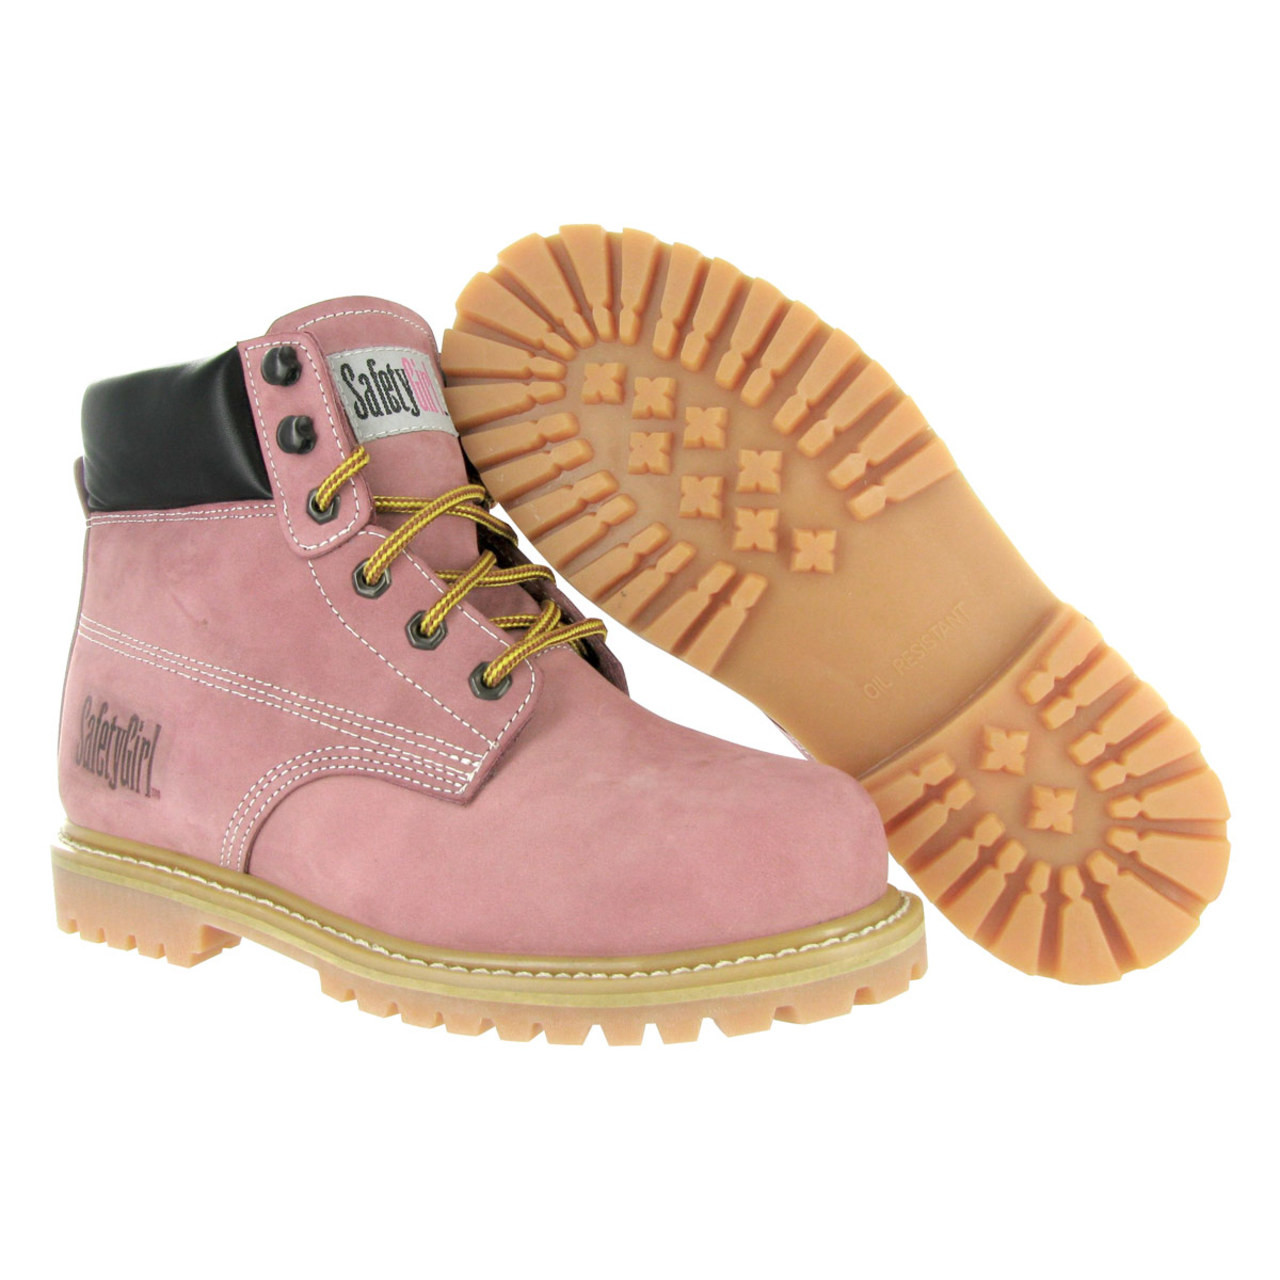 Image of Safety Girl Steel Toe Work Boots - Light Pink